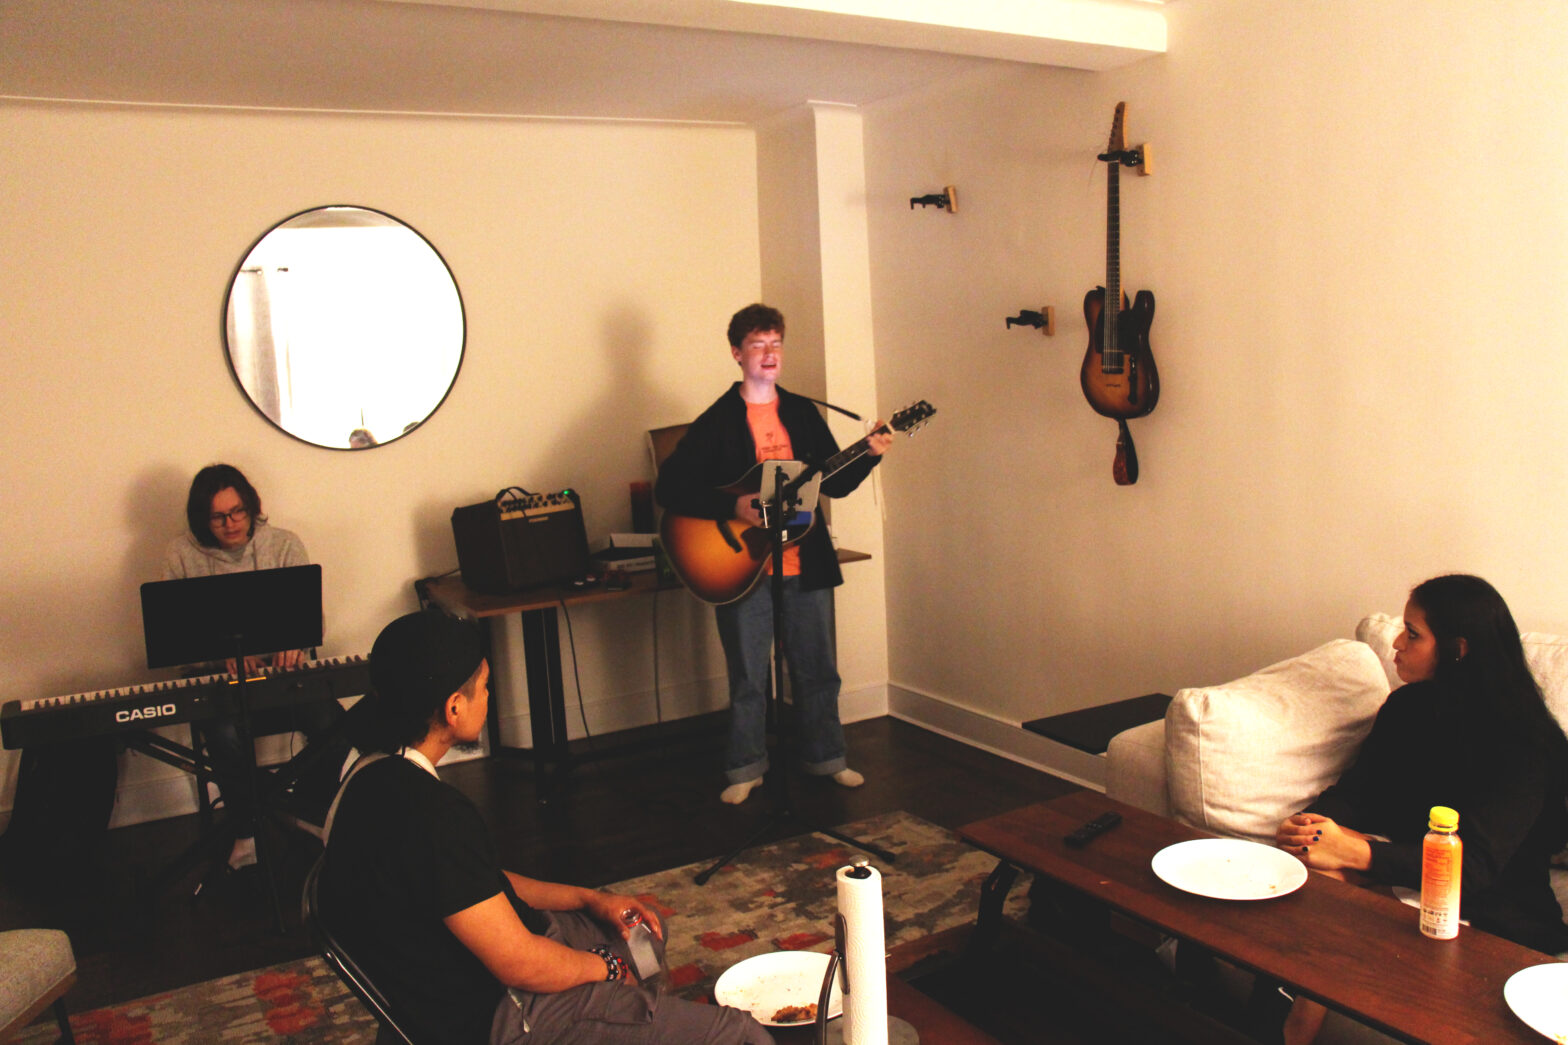 Four people playing music in a dimly lit living room.